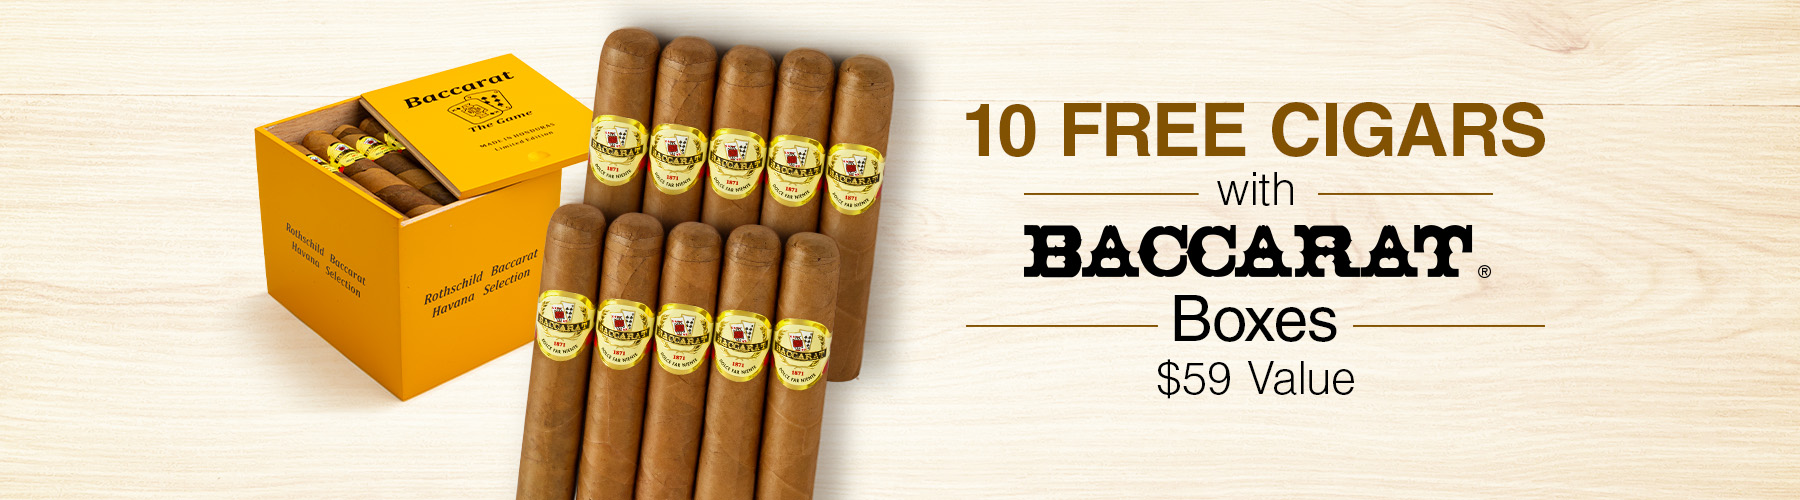 10 free cigars with Baccarat boxes! $59 Value